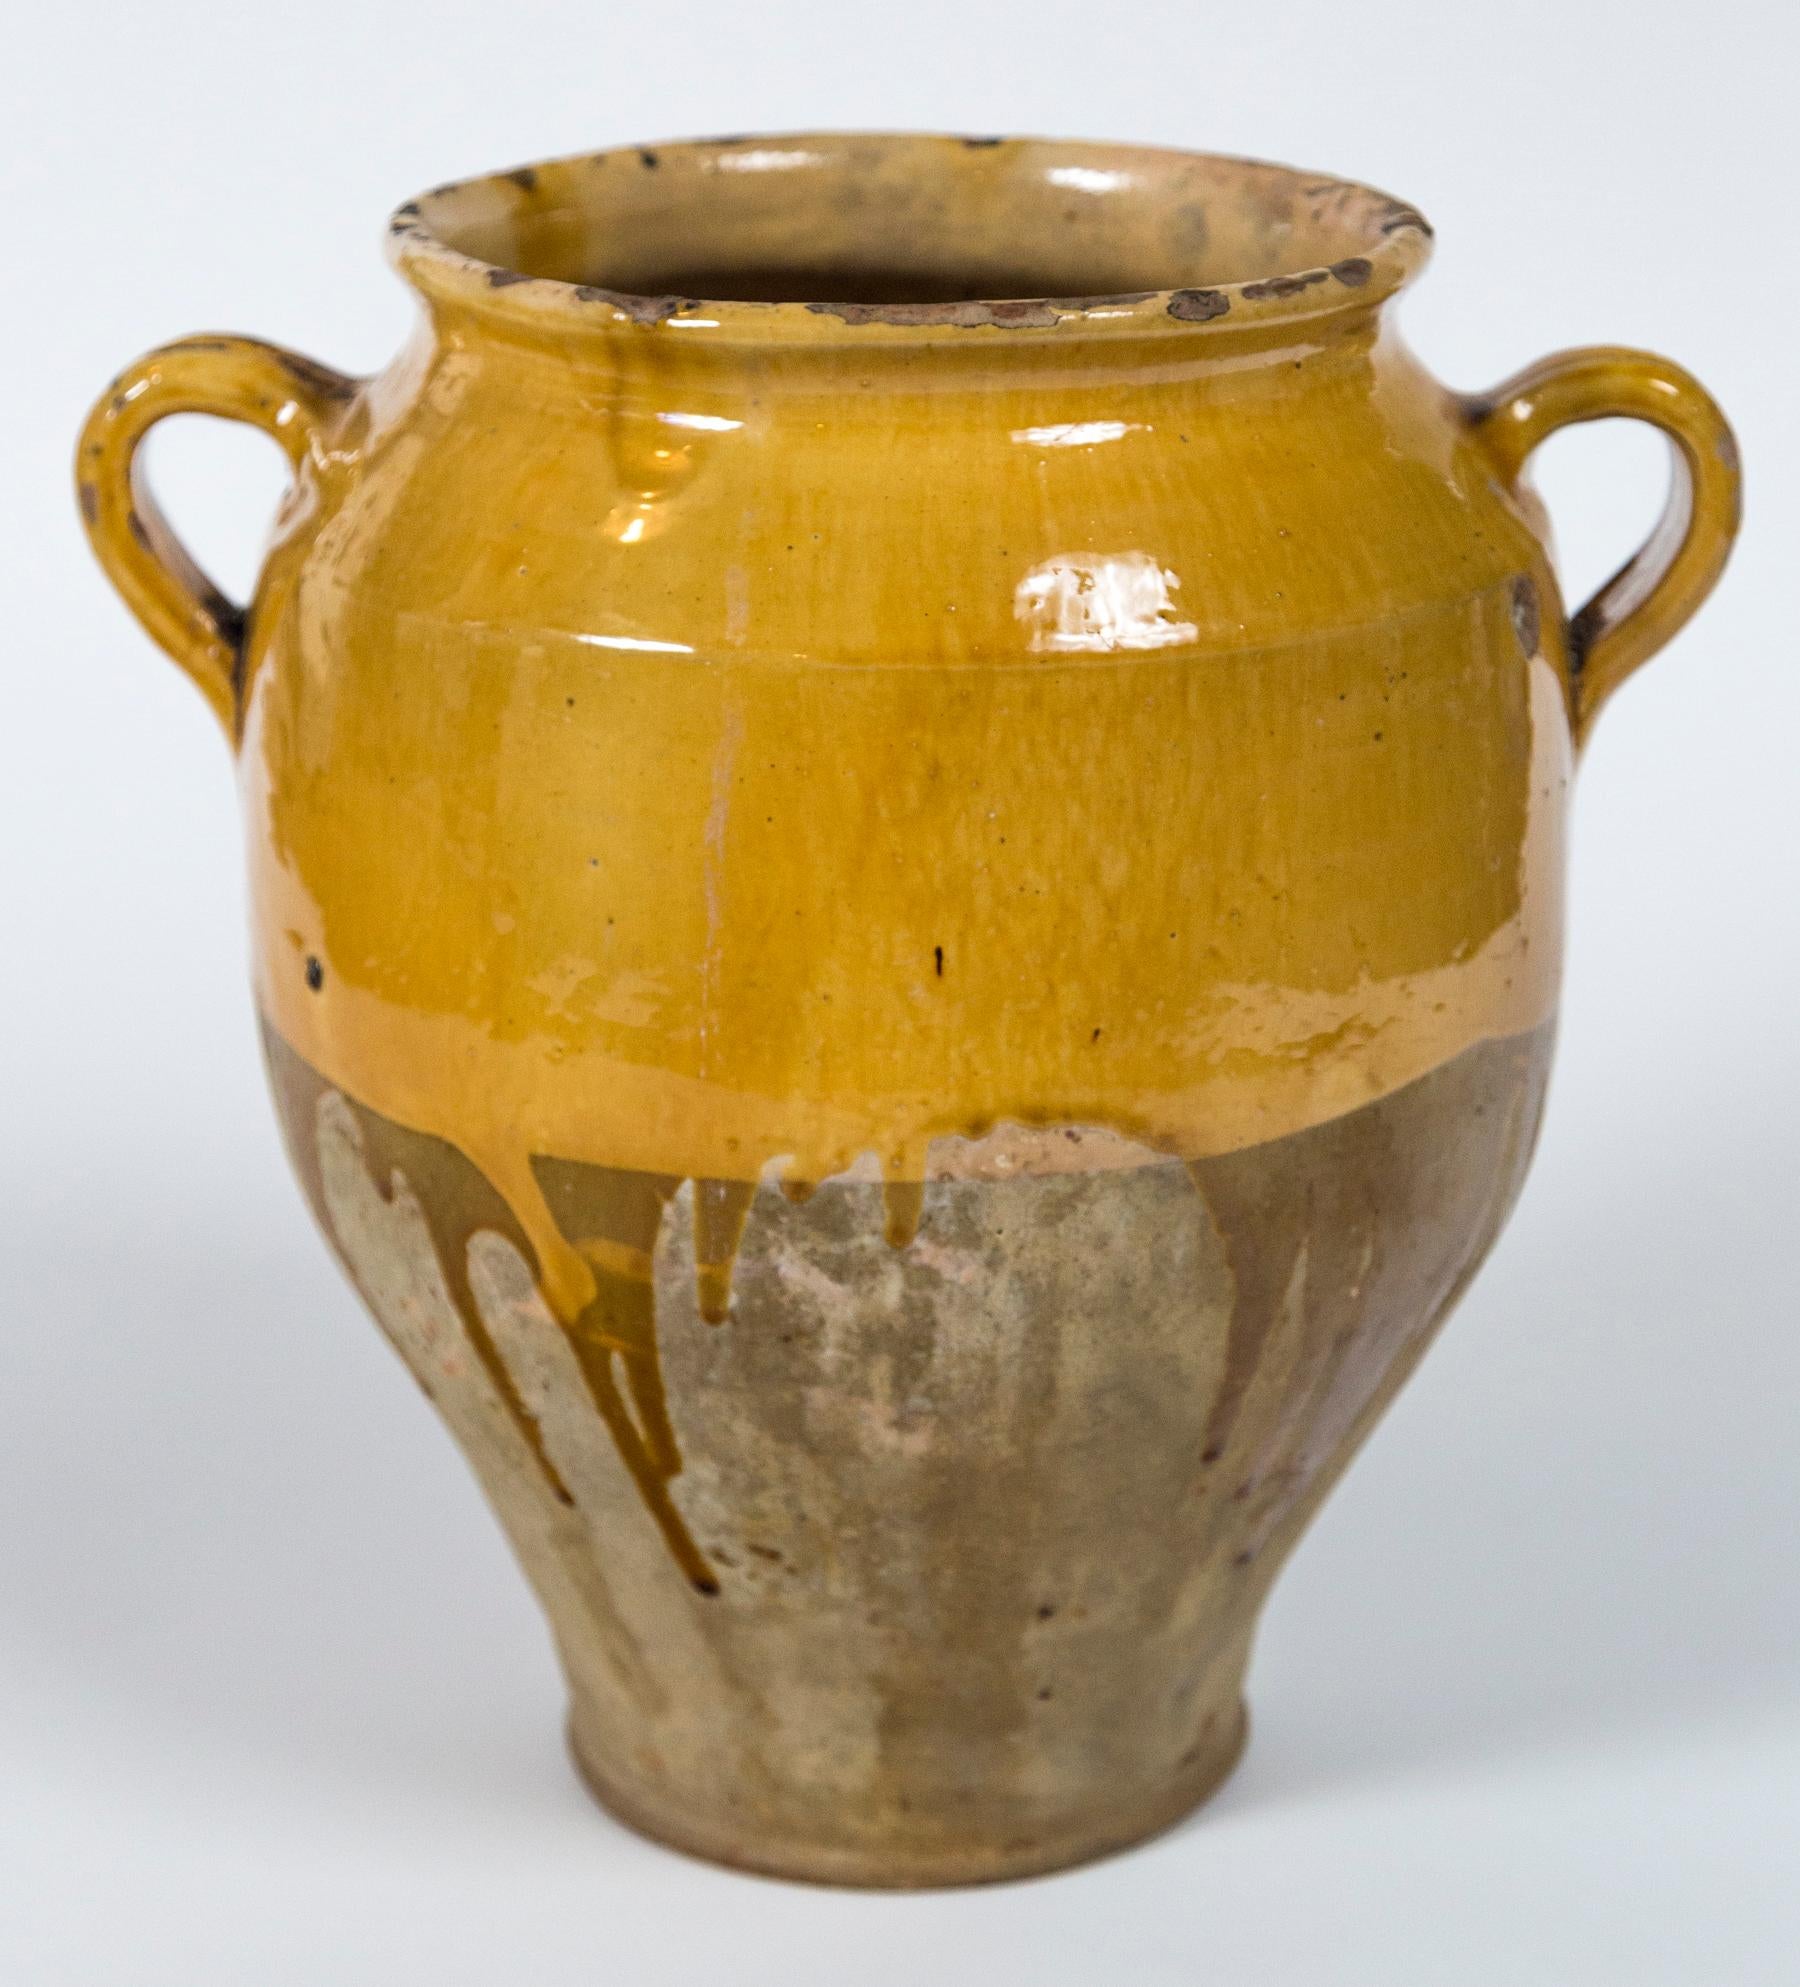 Antique French confit pot, circa 1900. Aged terracotta with deep yellow glaze. Confit pots were used for food preservation. The bottom half was left unglazed to allow the pot to keep cool while half buried in the ground.